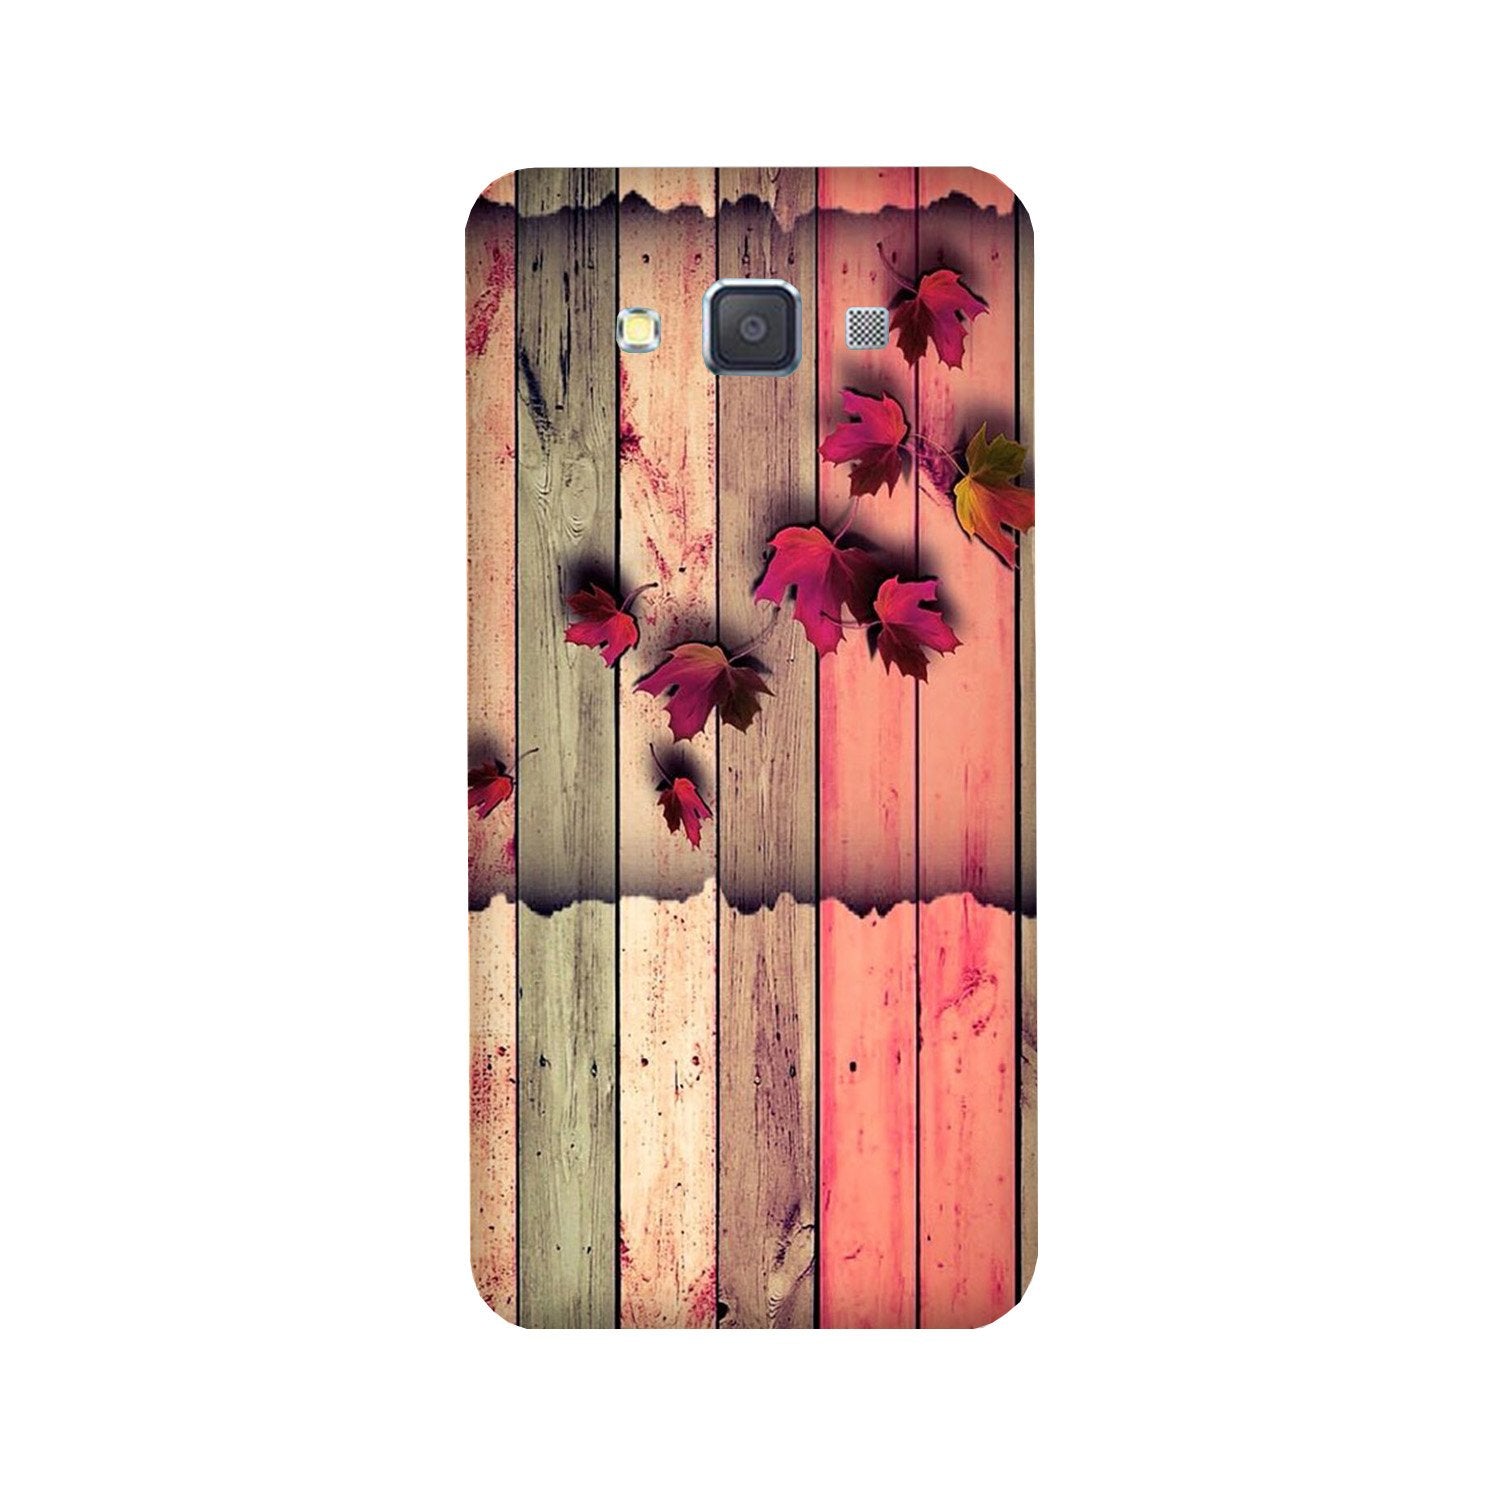 Wooden look2 Case for Galaxy J5 (2016)